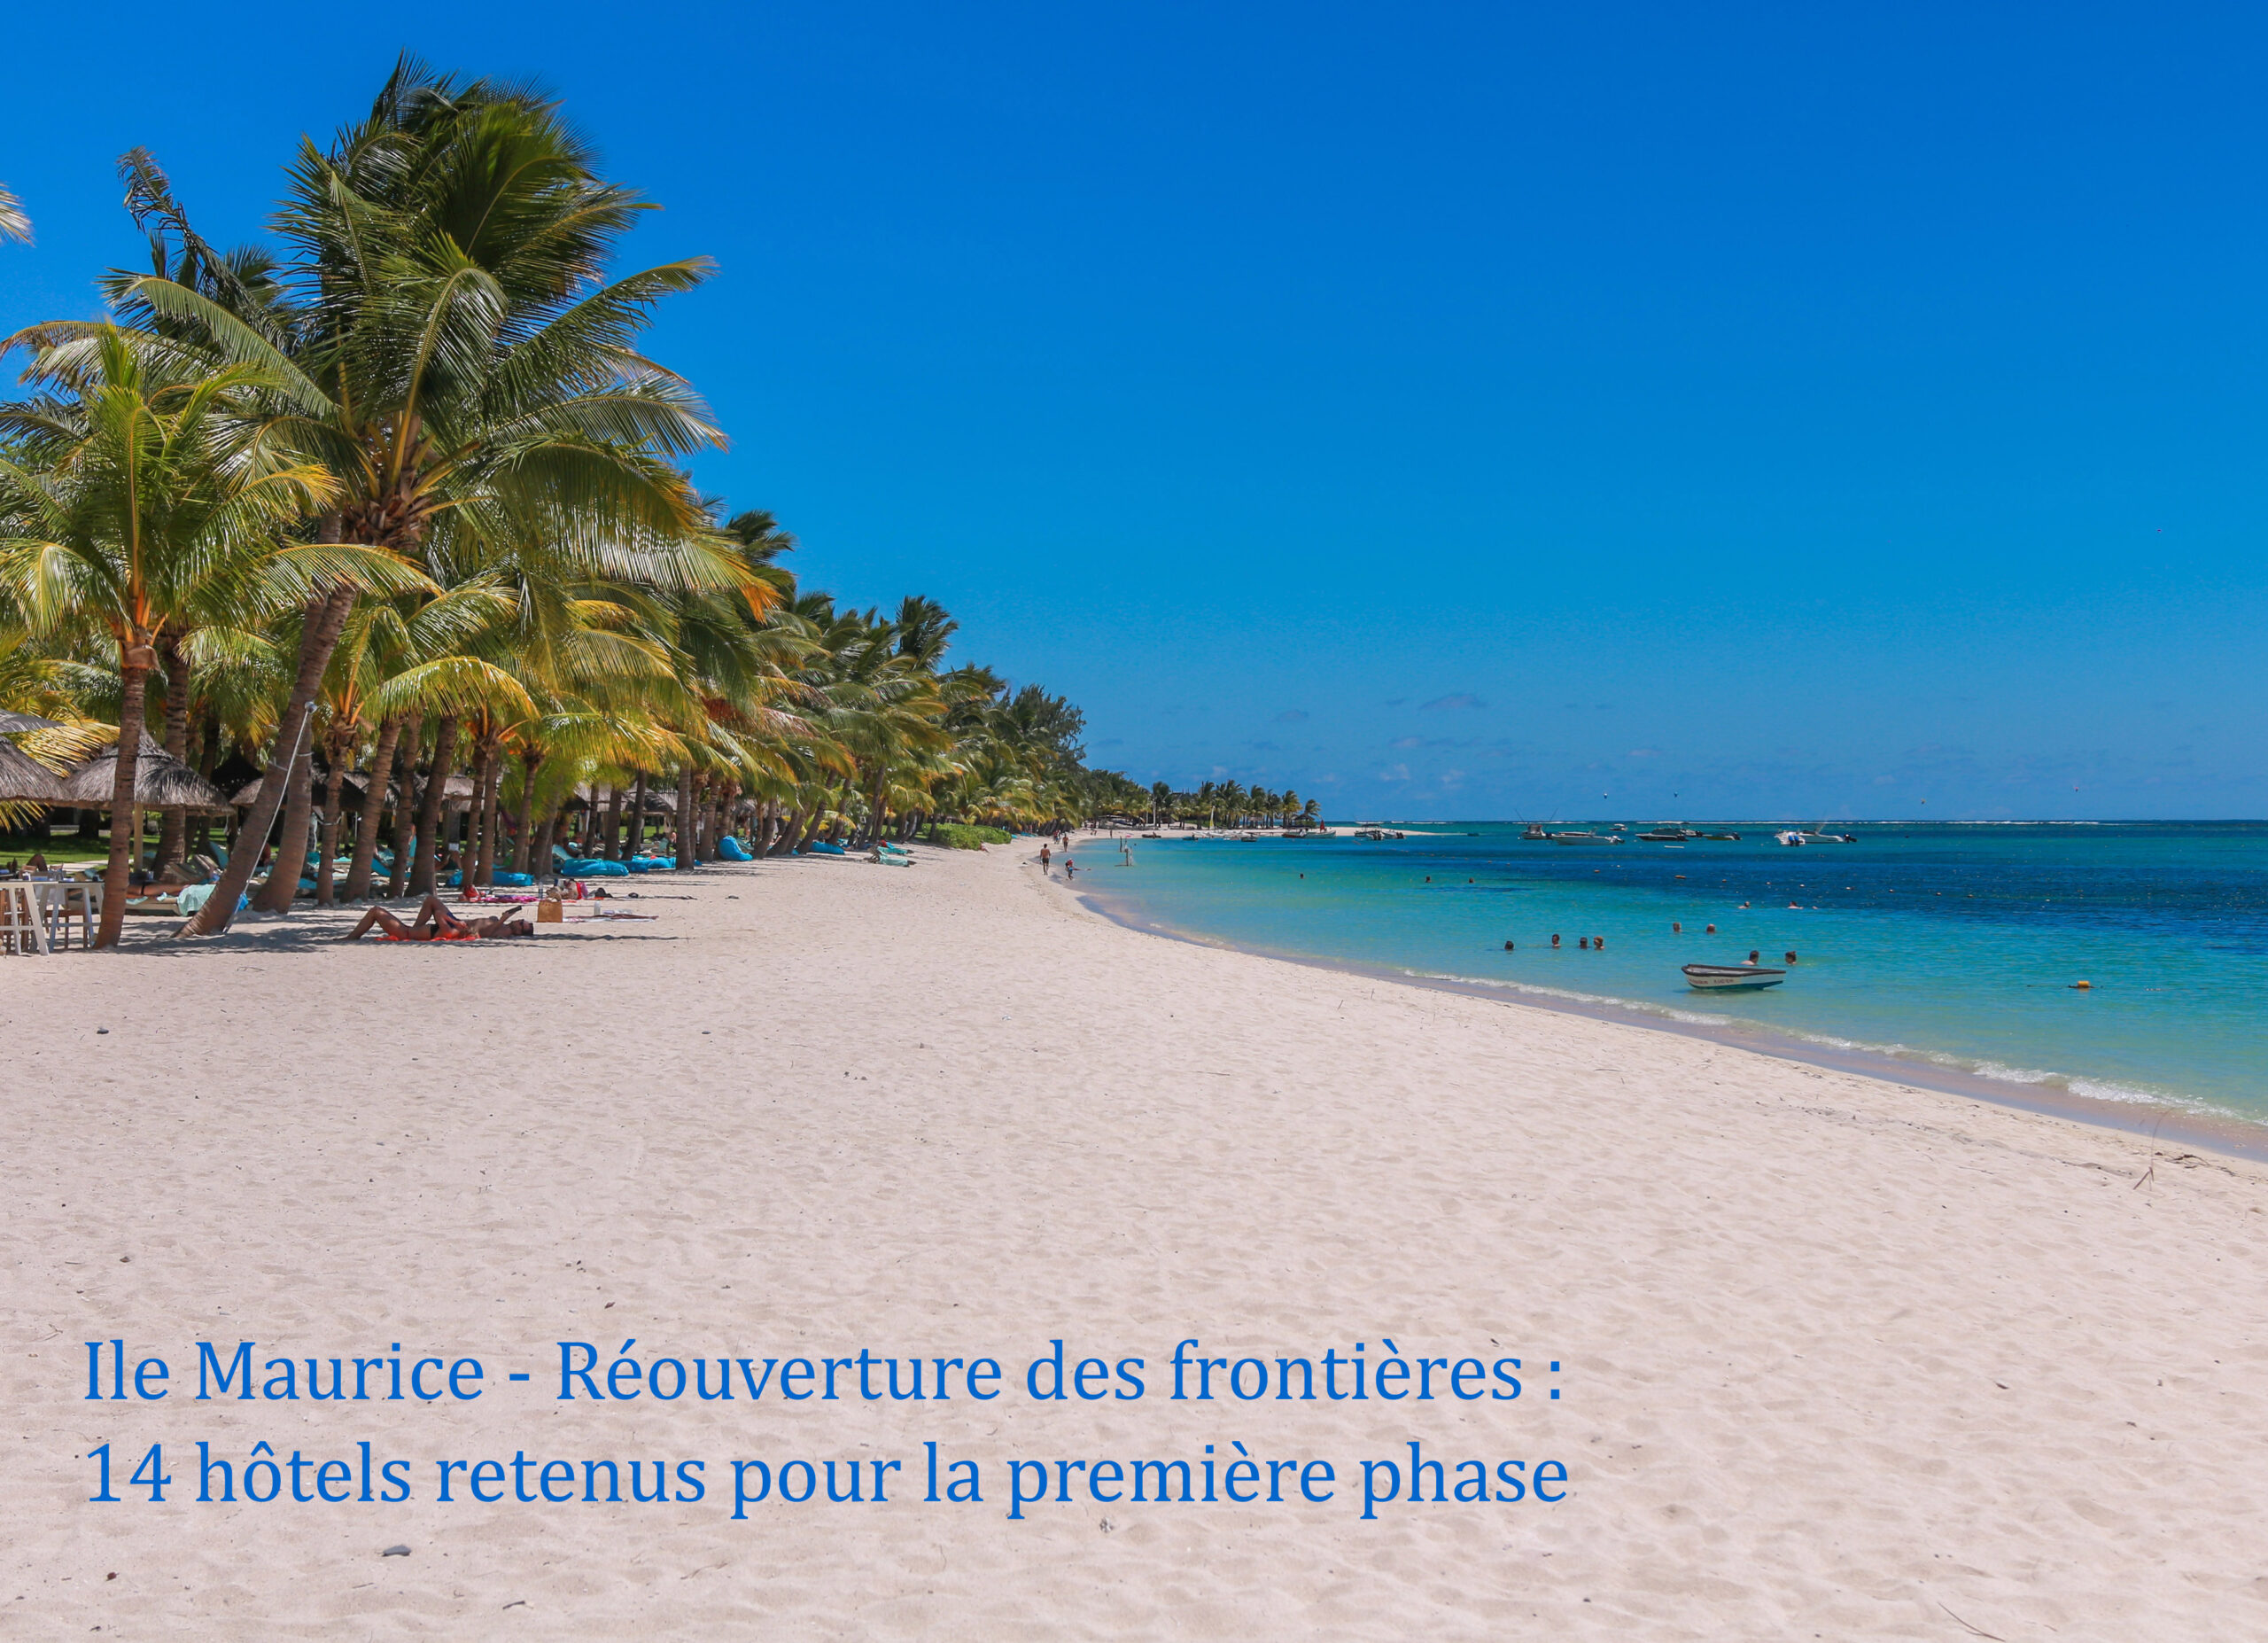 requirements for travel to mauritius